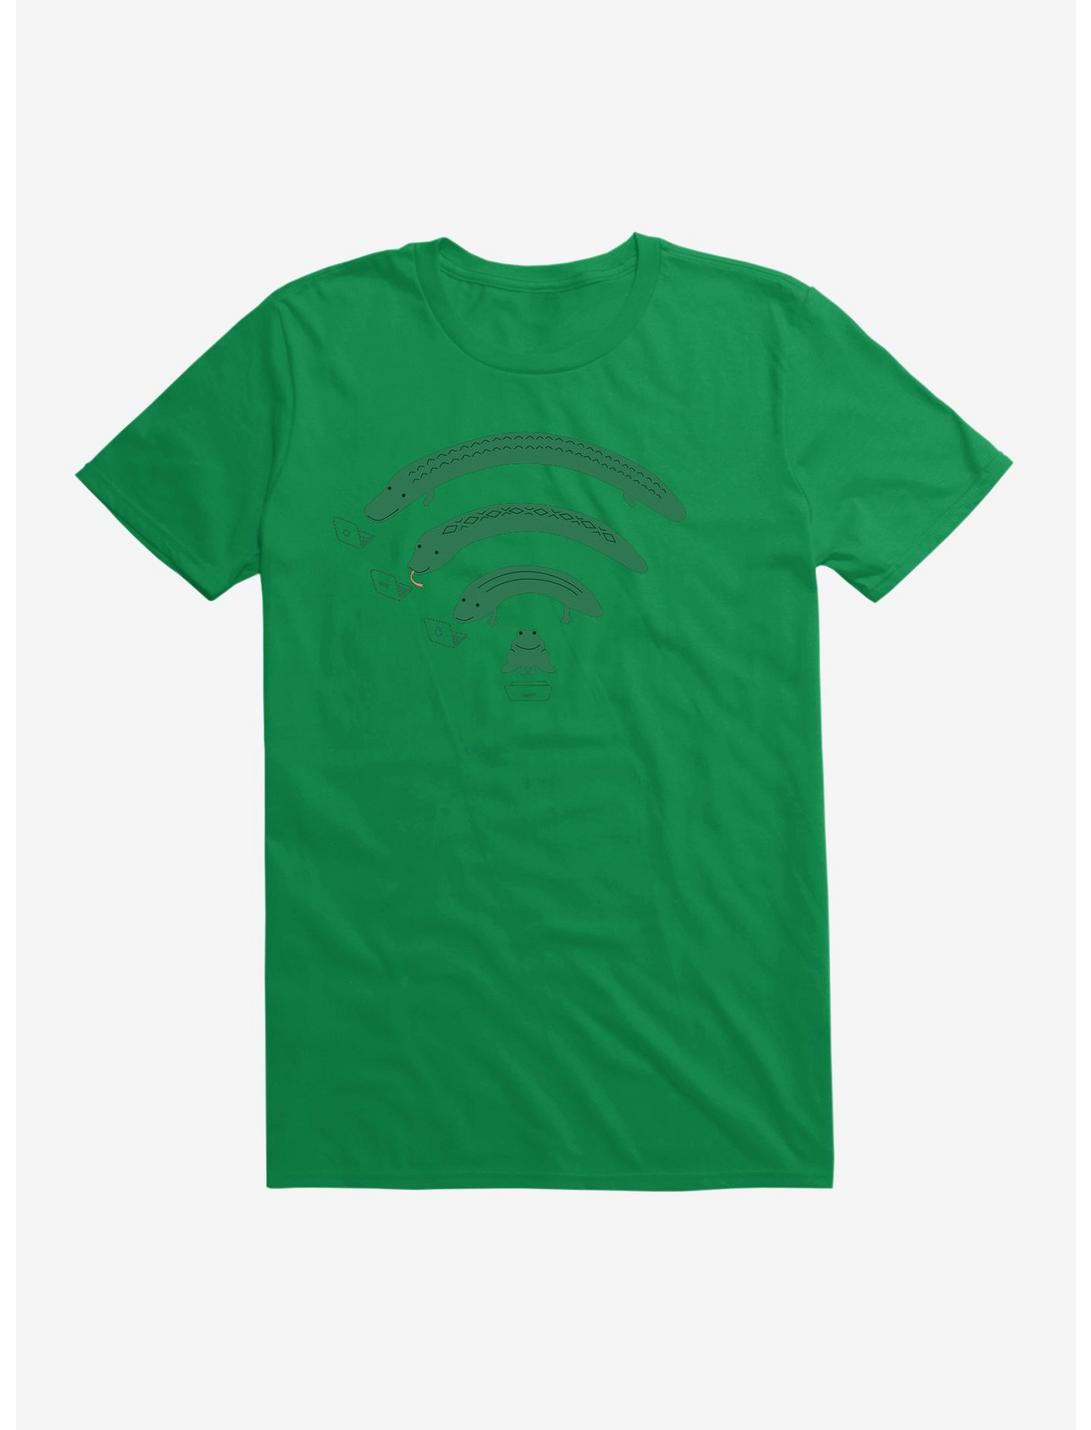 Everybody Loves The Internet T-Shirt, KELLY GREEN, hi-res